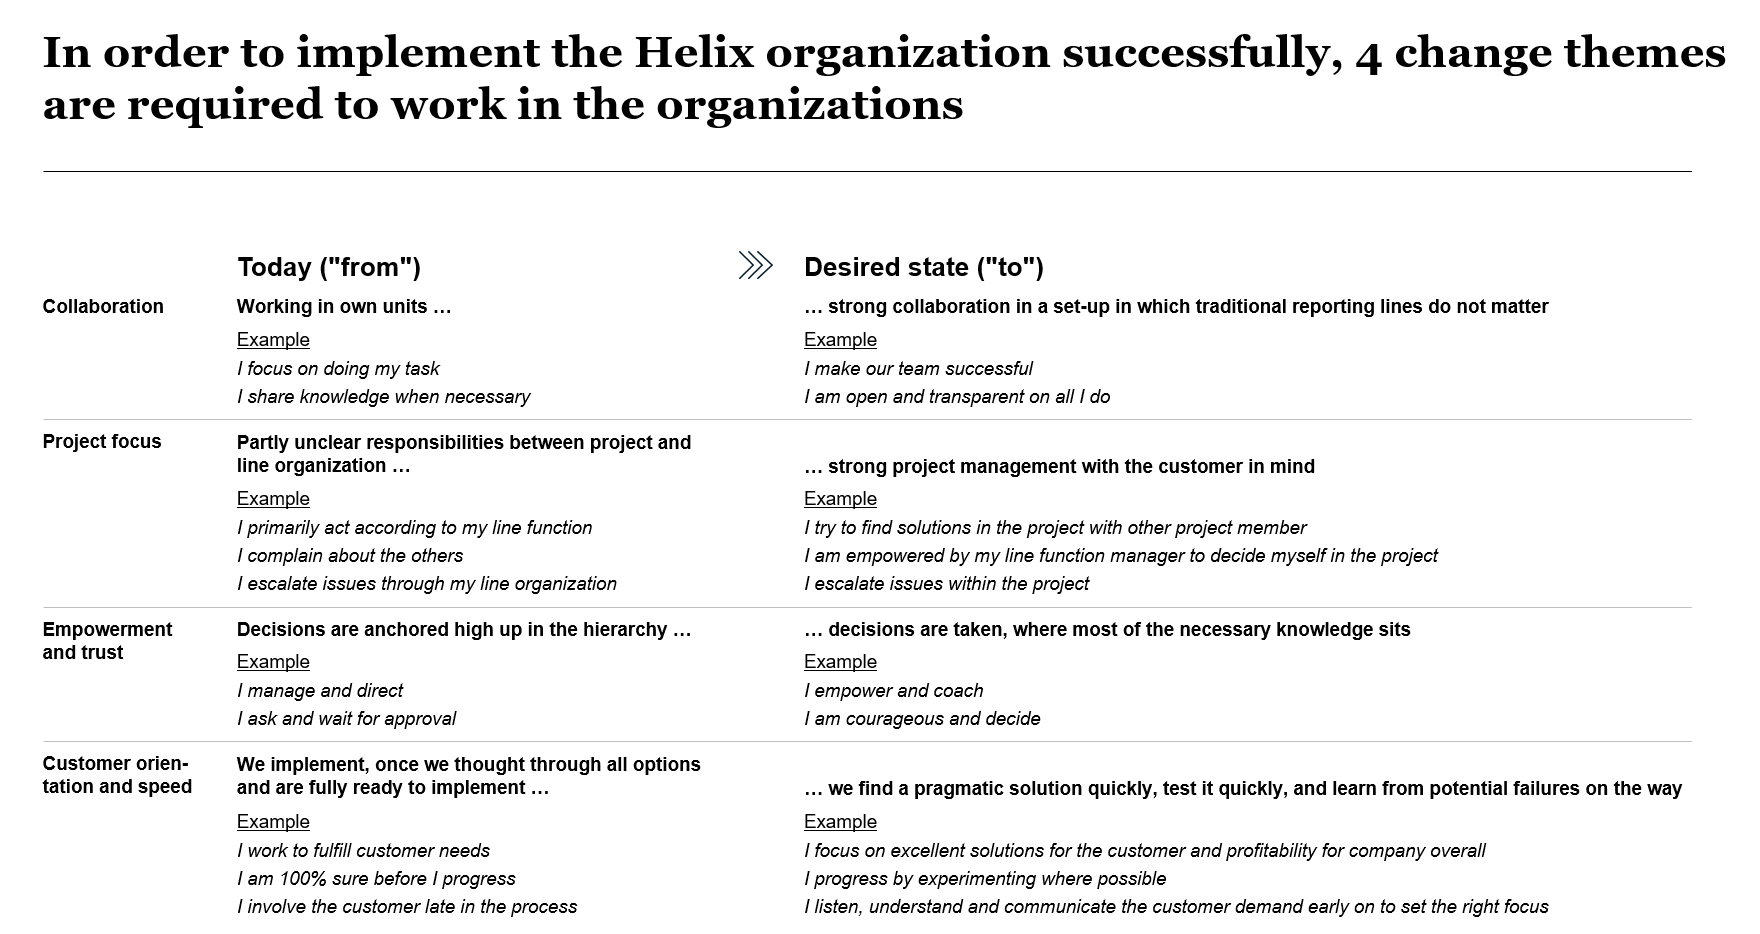 Four considerations for helix success beyond structure (part three)